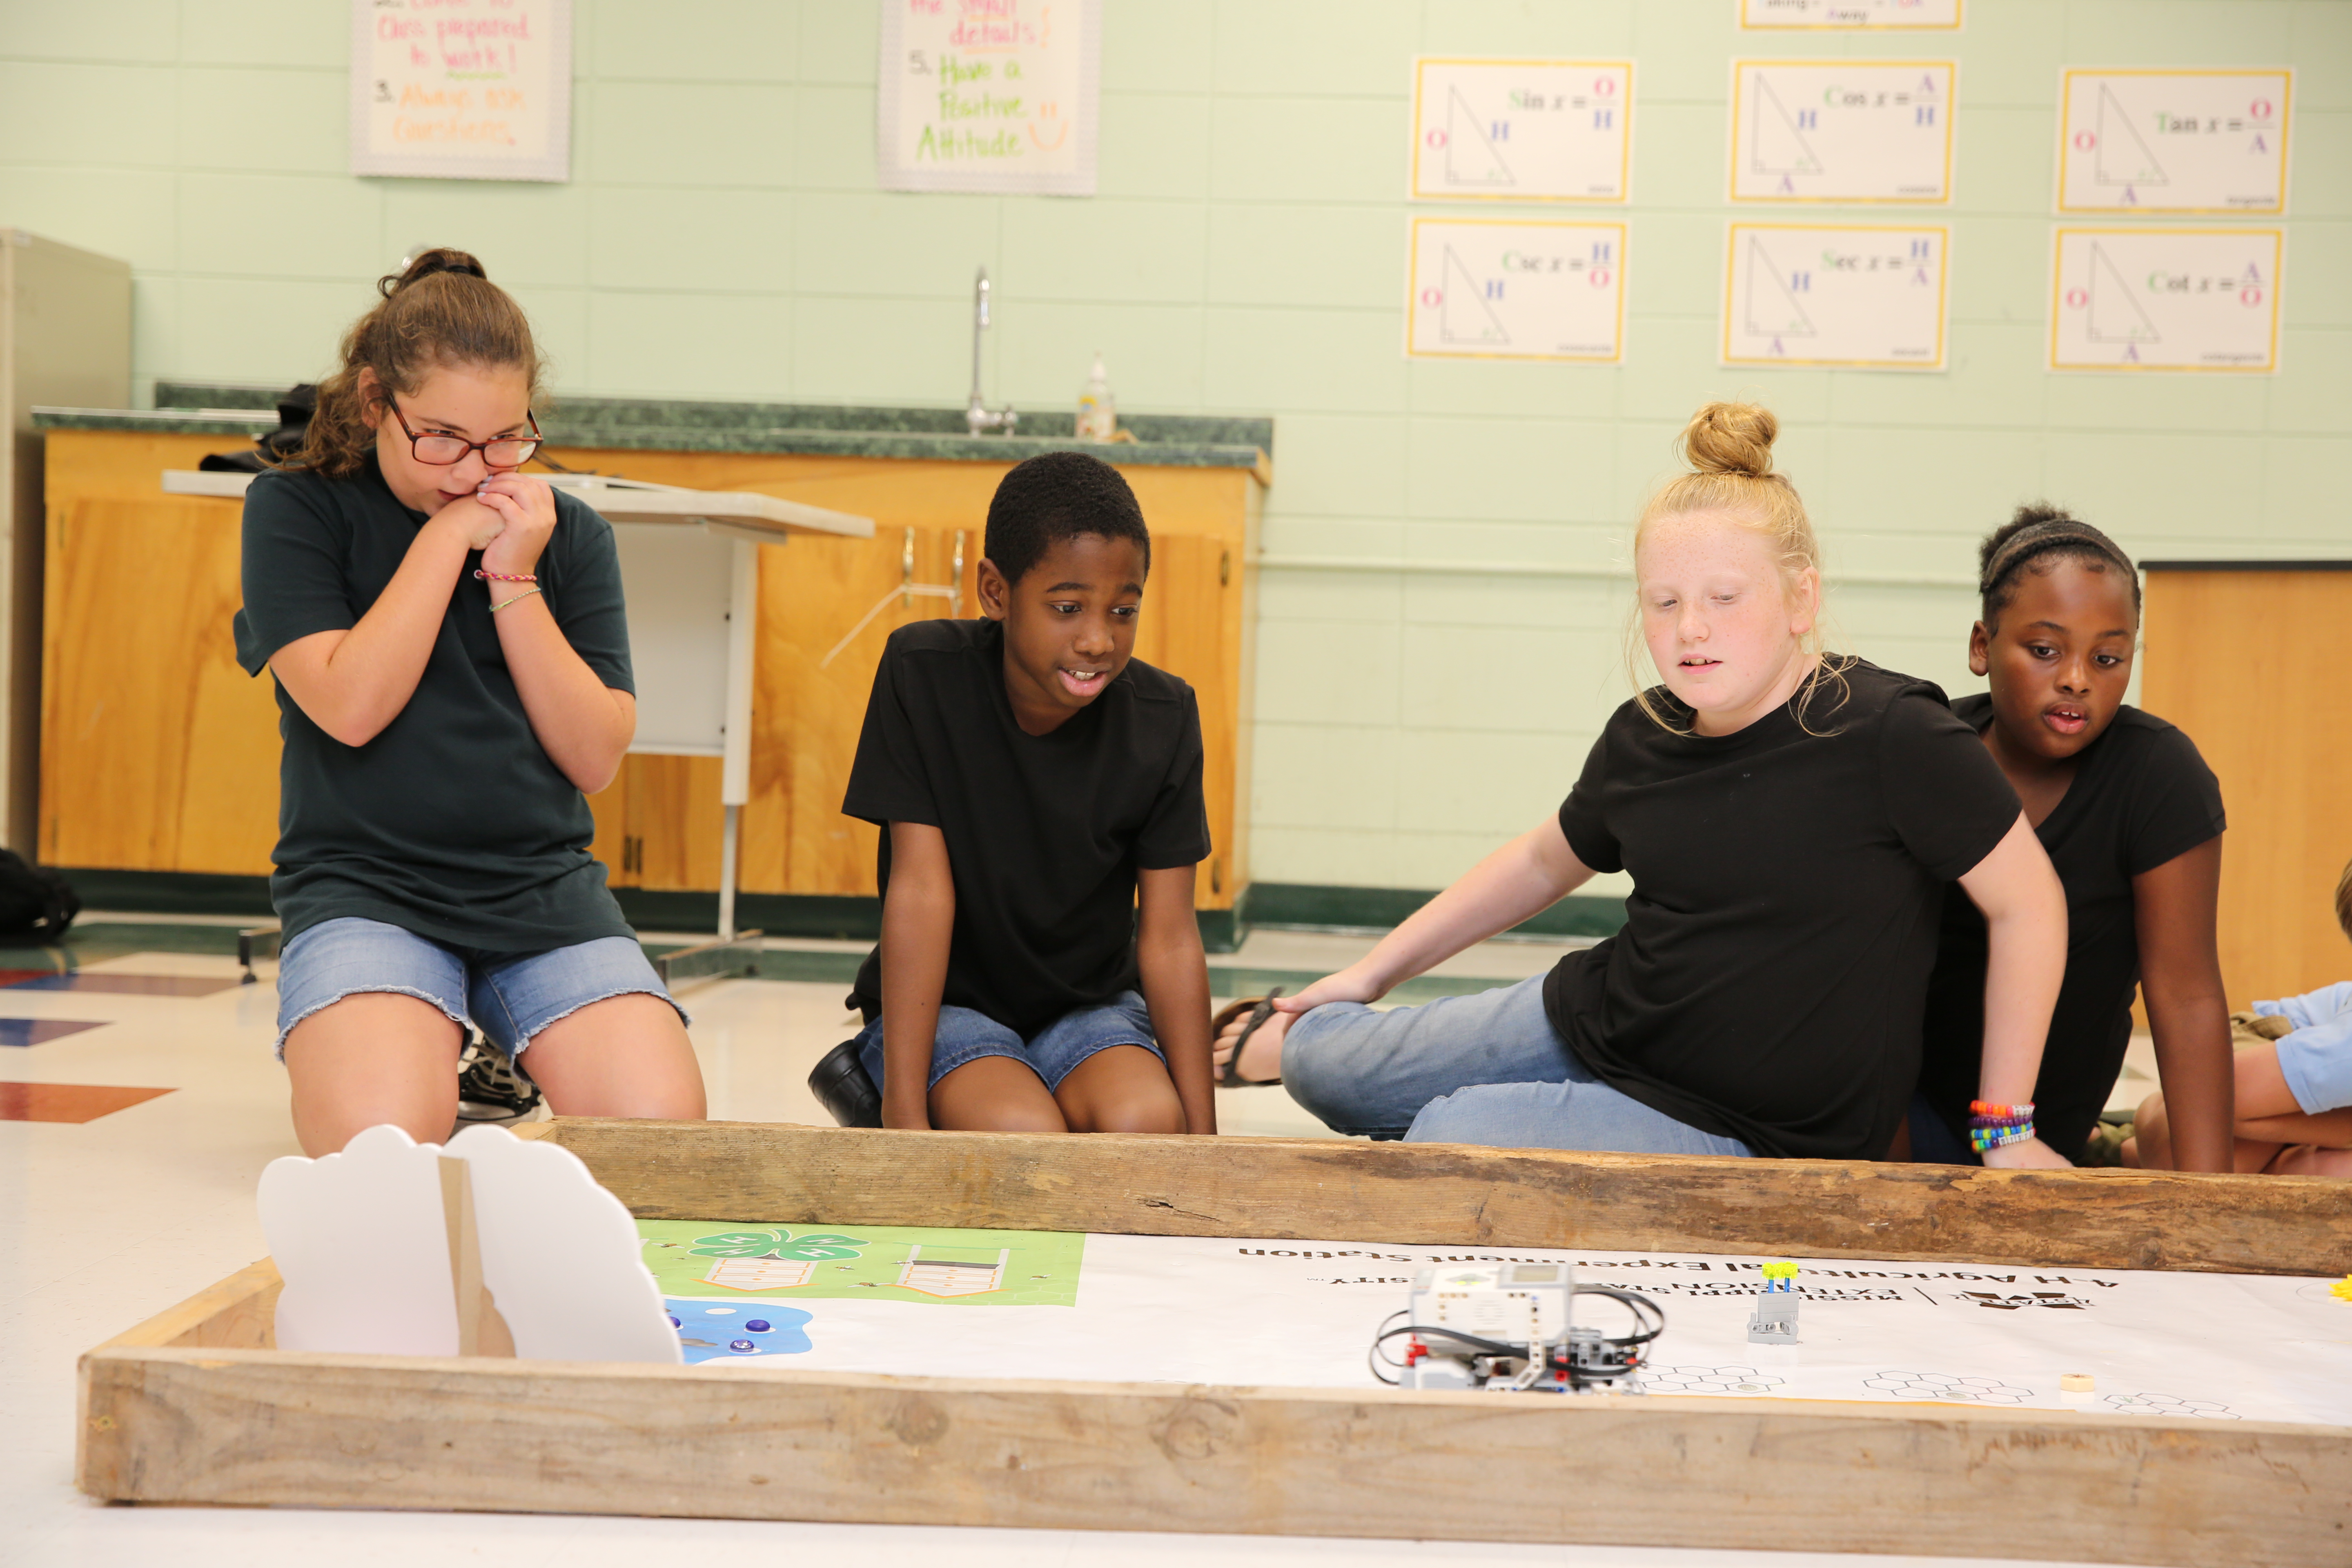 Three girls and one boy wearing black shirts looking anxious as they compete in a robotics competition.